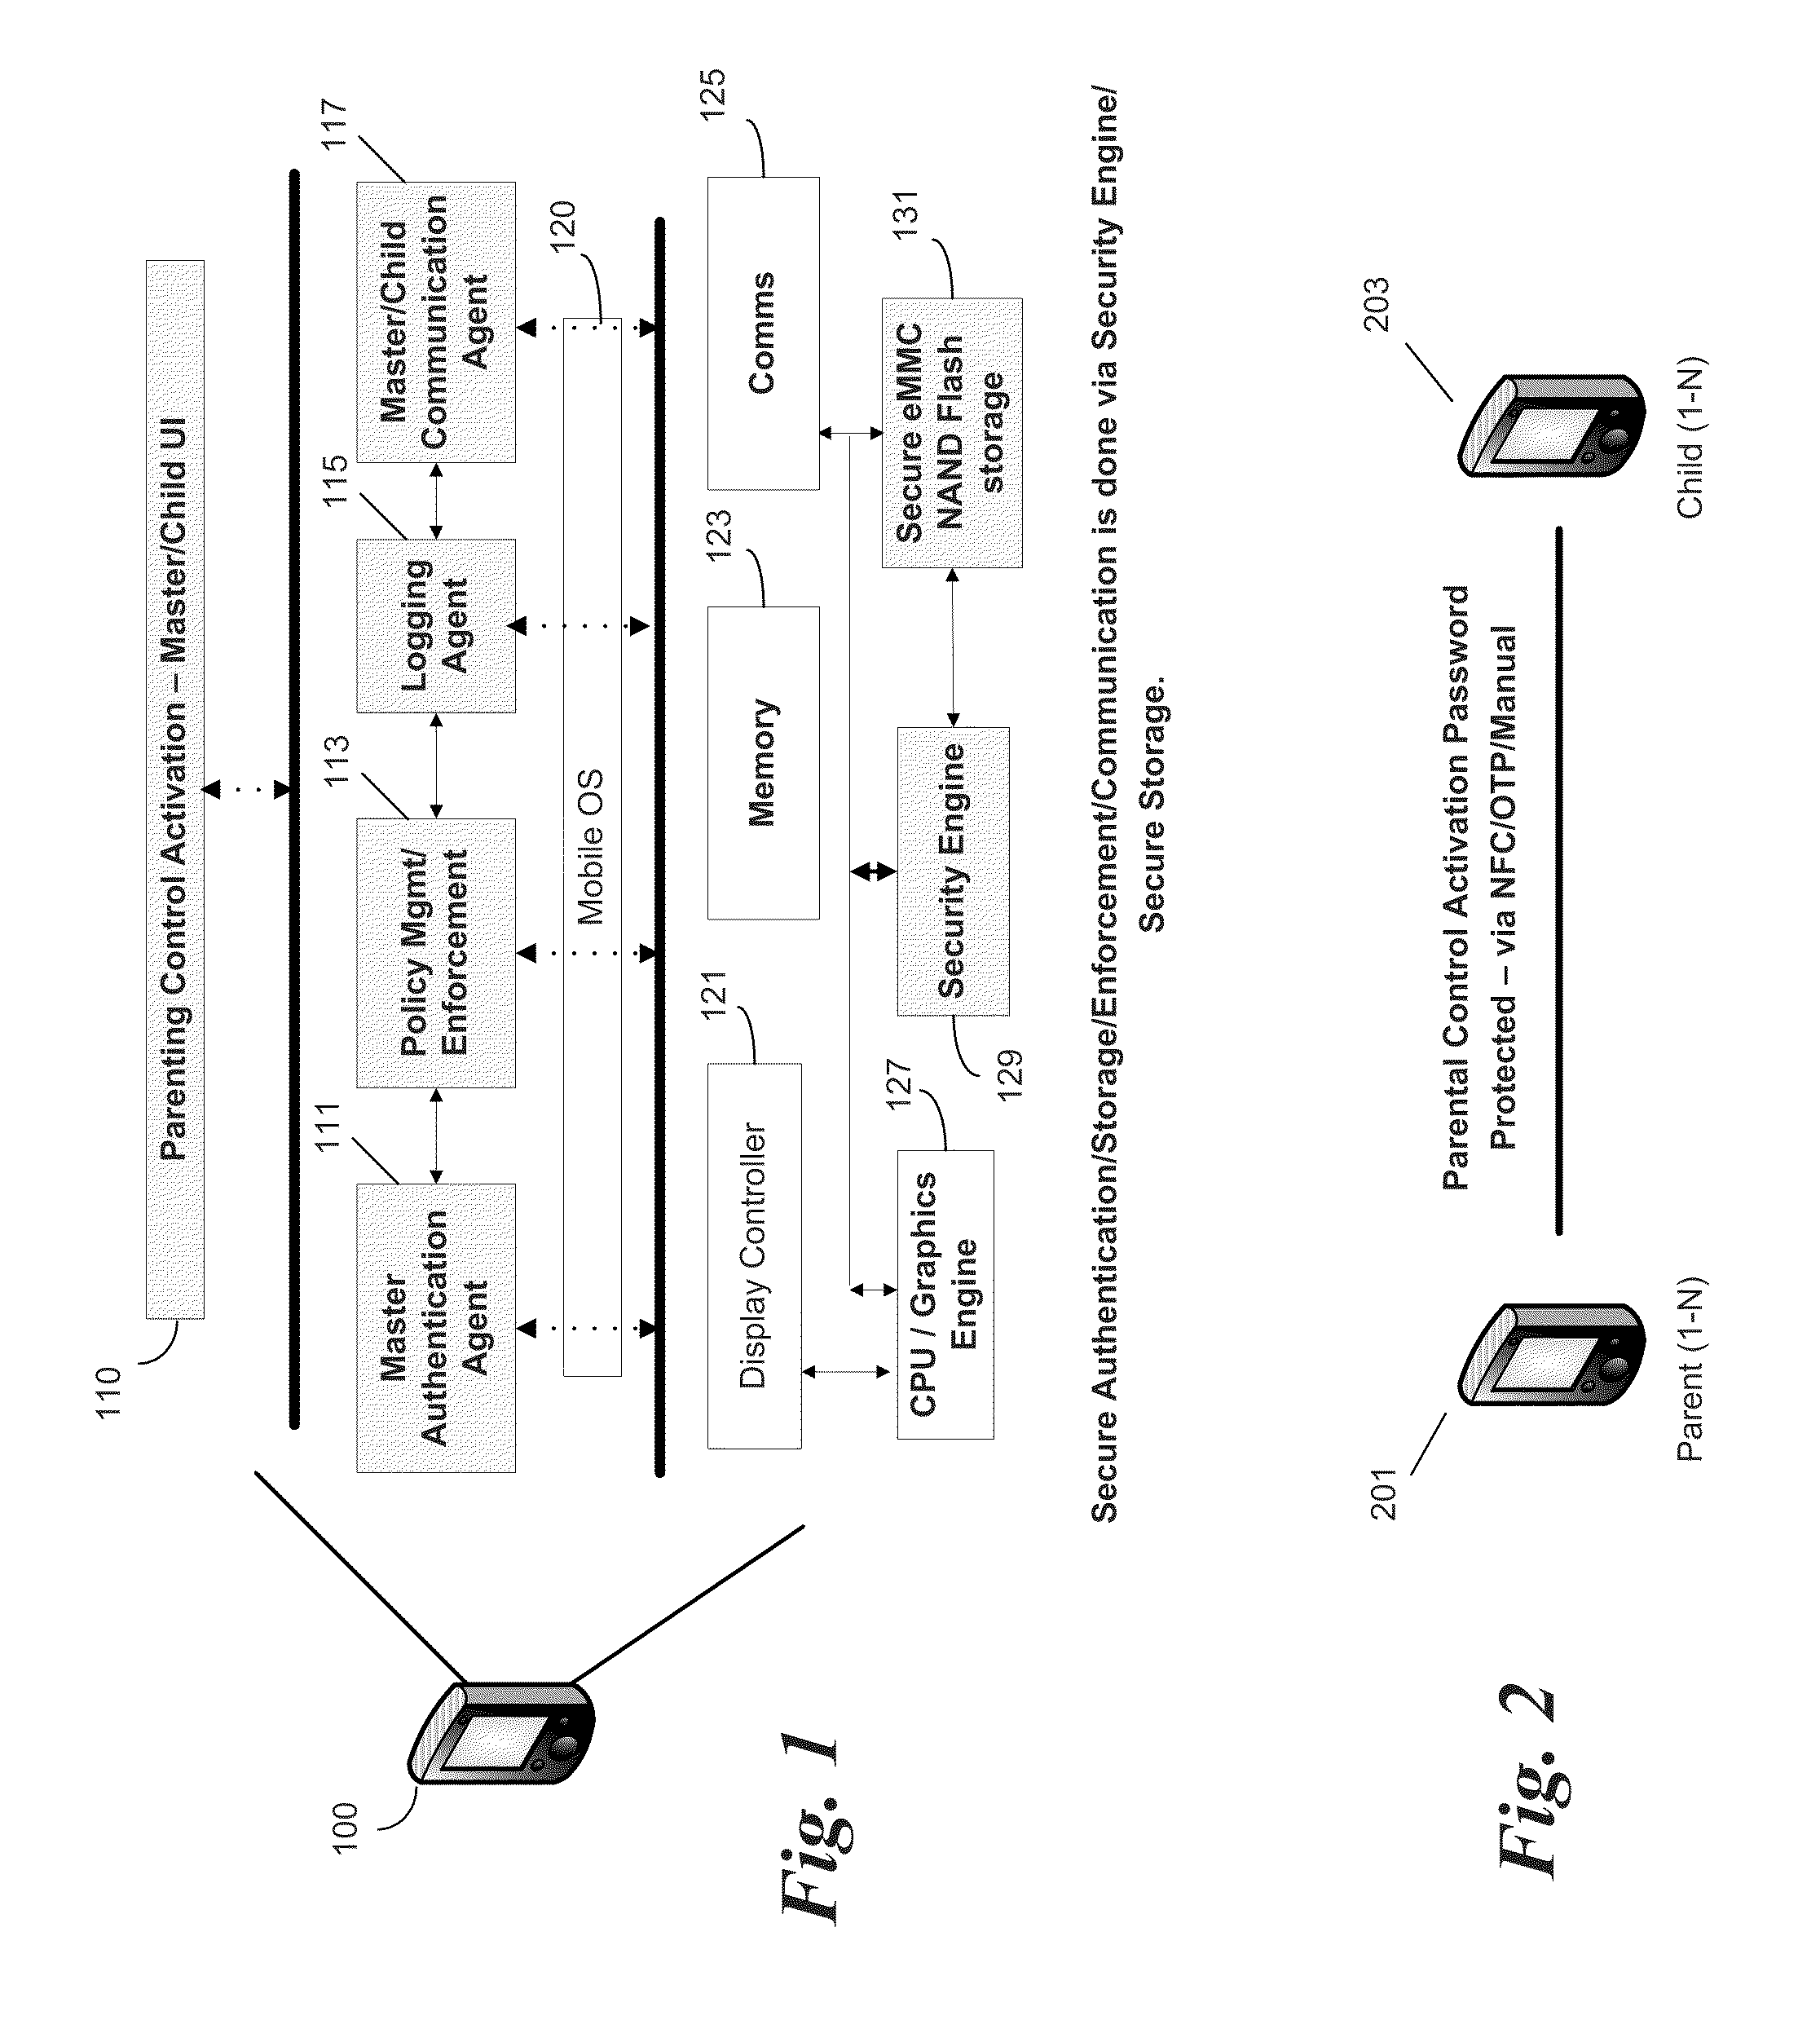 Method and apparatus for bearer and server independent parental control on smartphone, managed by the smartphone